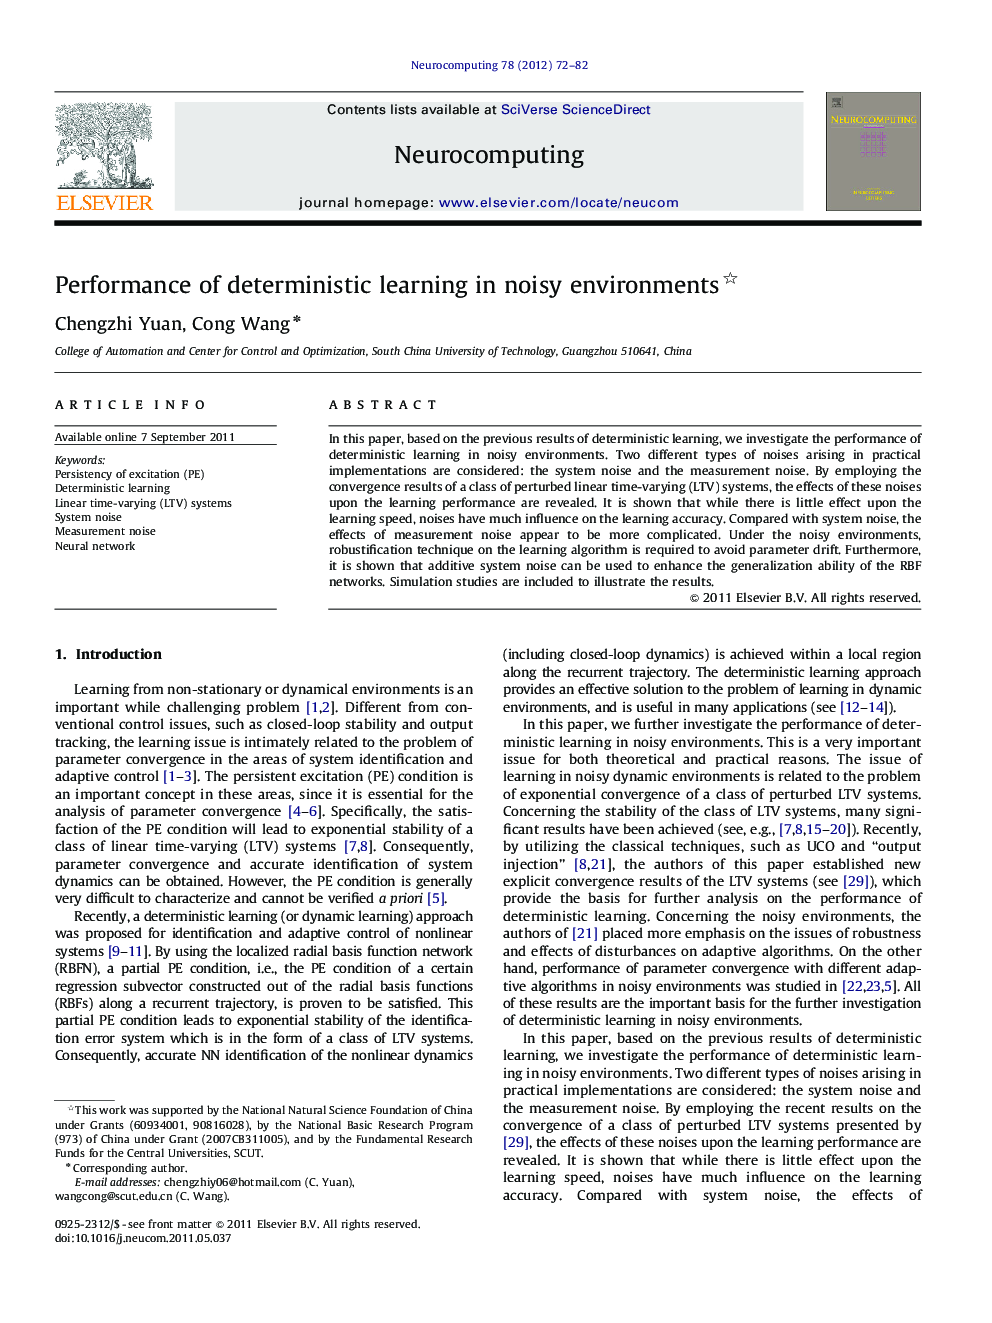 Performance of deterministic learning in noisy environments 